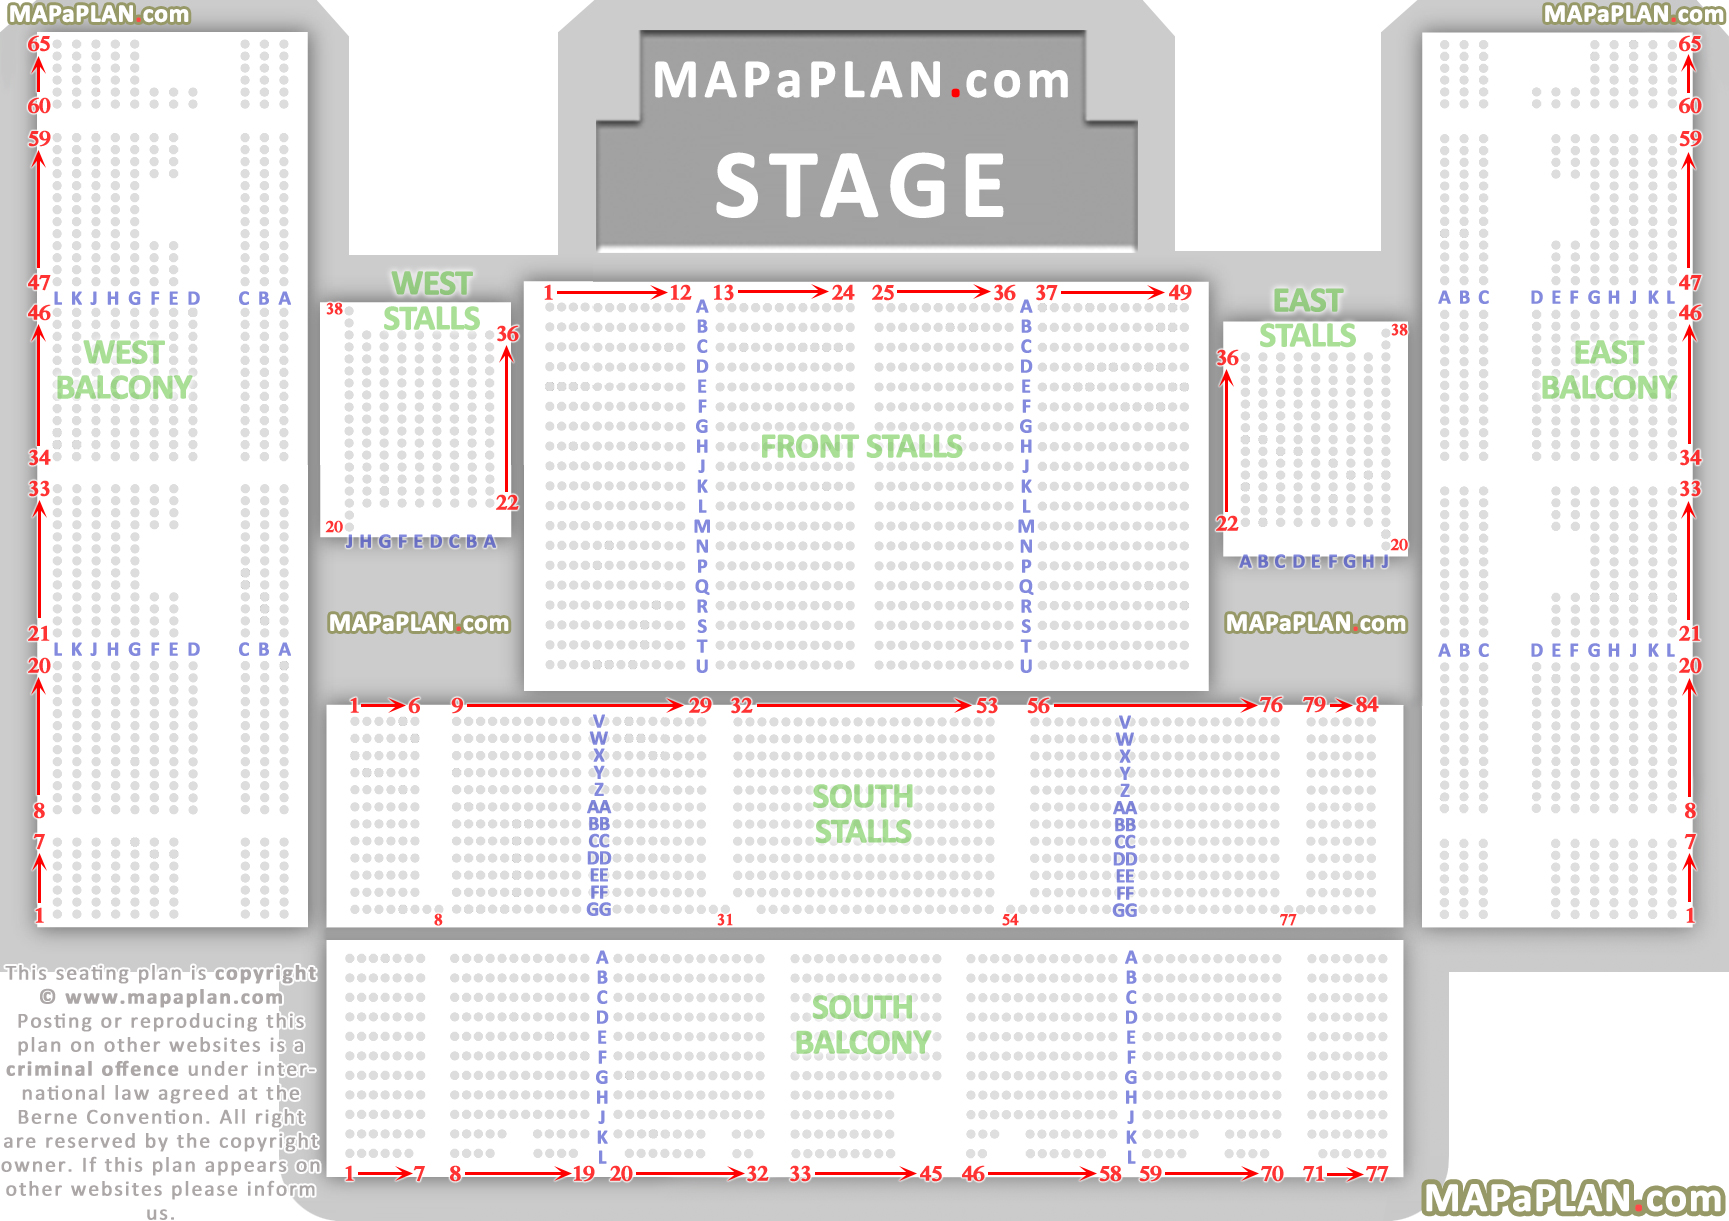 Brighton Centre Detailed Seat Row Numbers Concert Chart Showing Flat Front Stalls Raised Stalls And Balconies West East South